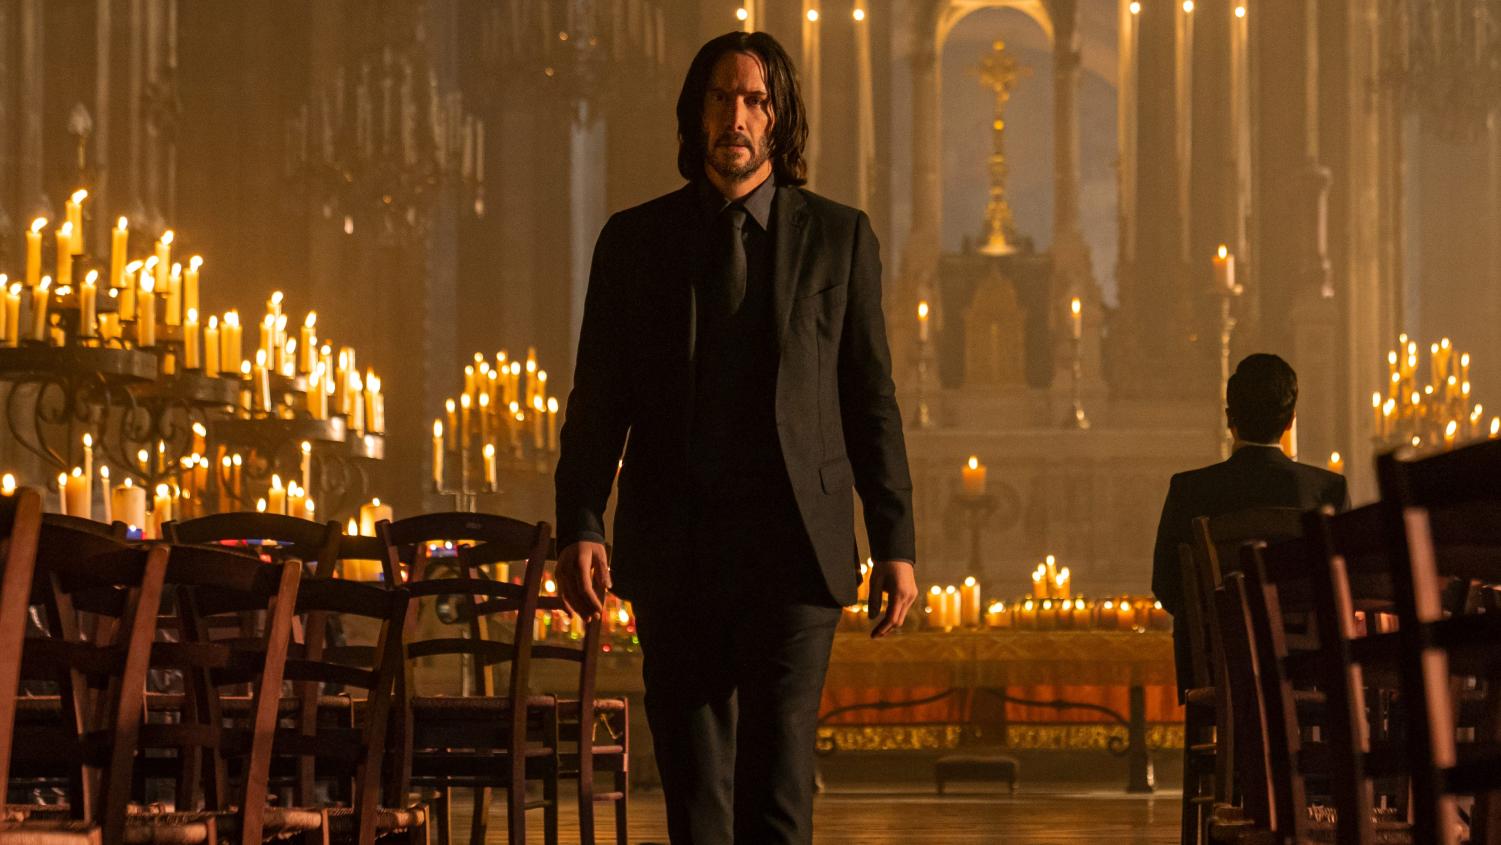 John Wick 4 Original Runtime Was Three Hours and 45 Minutes